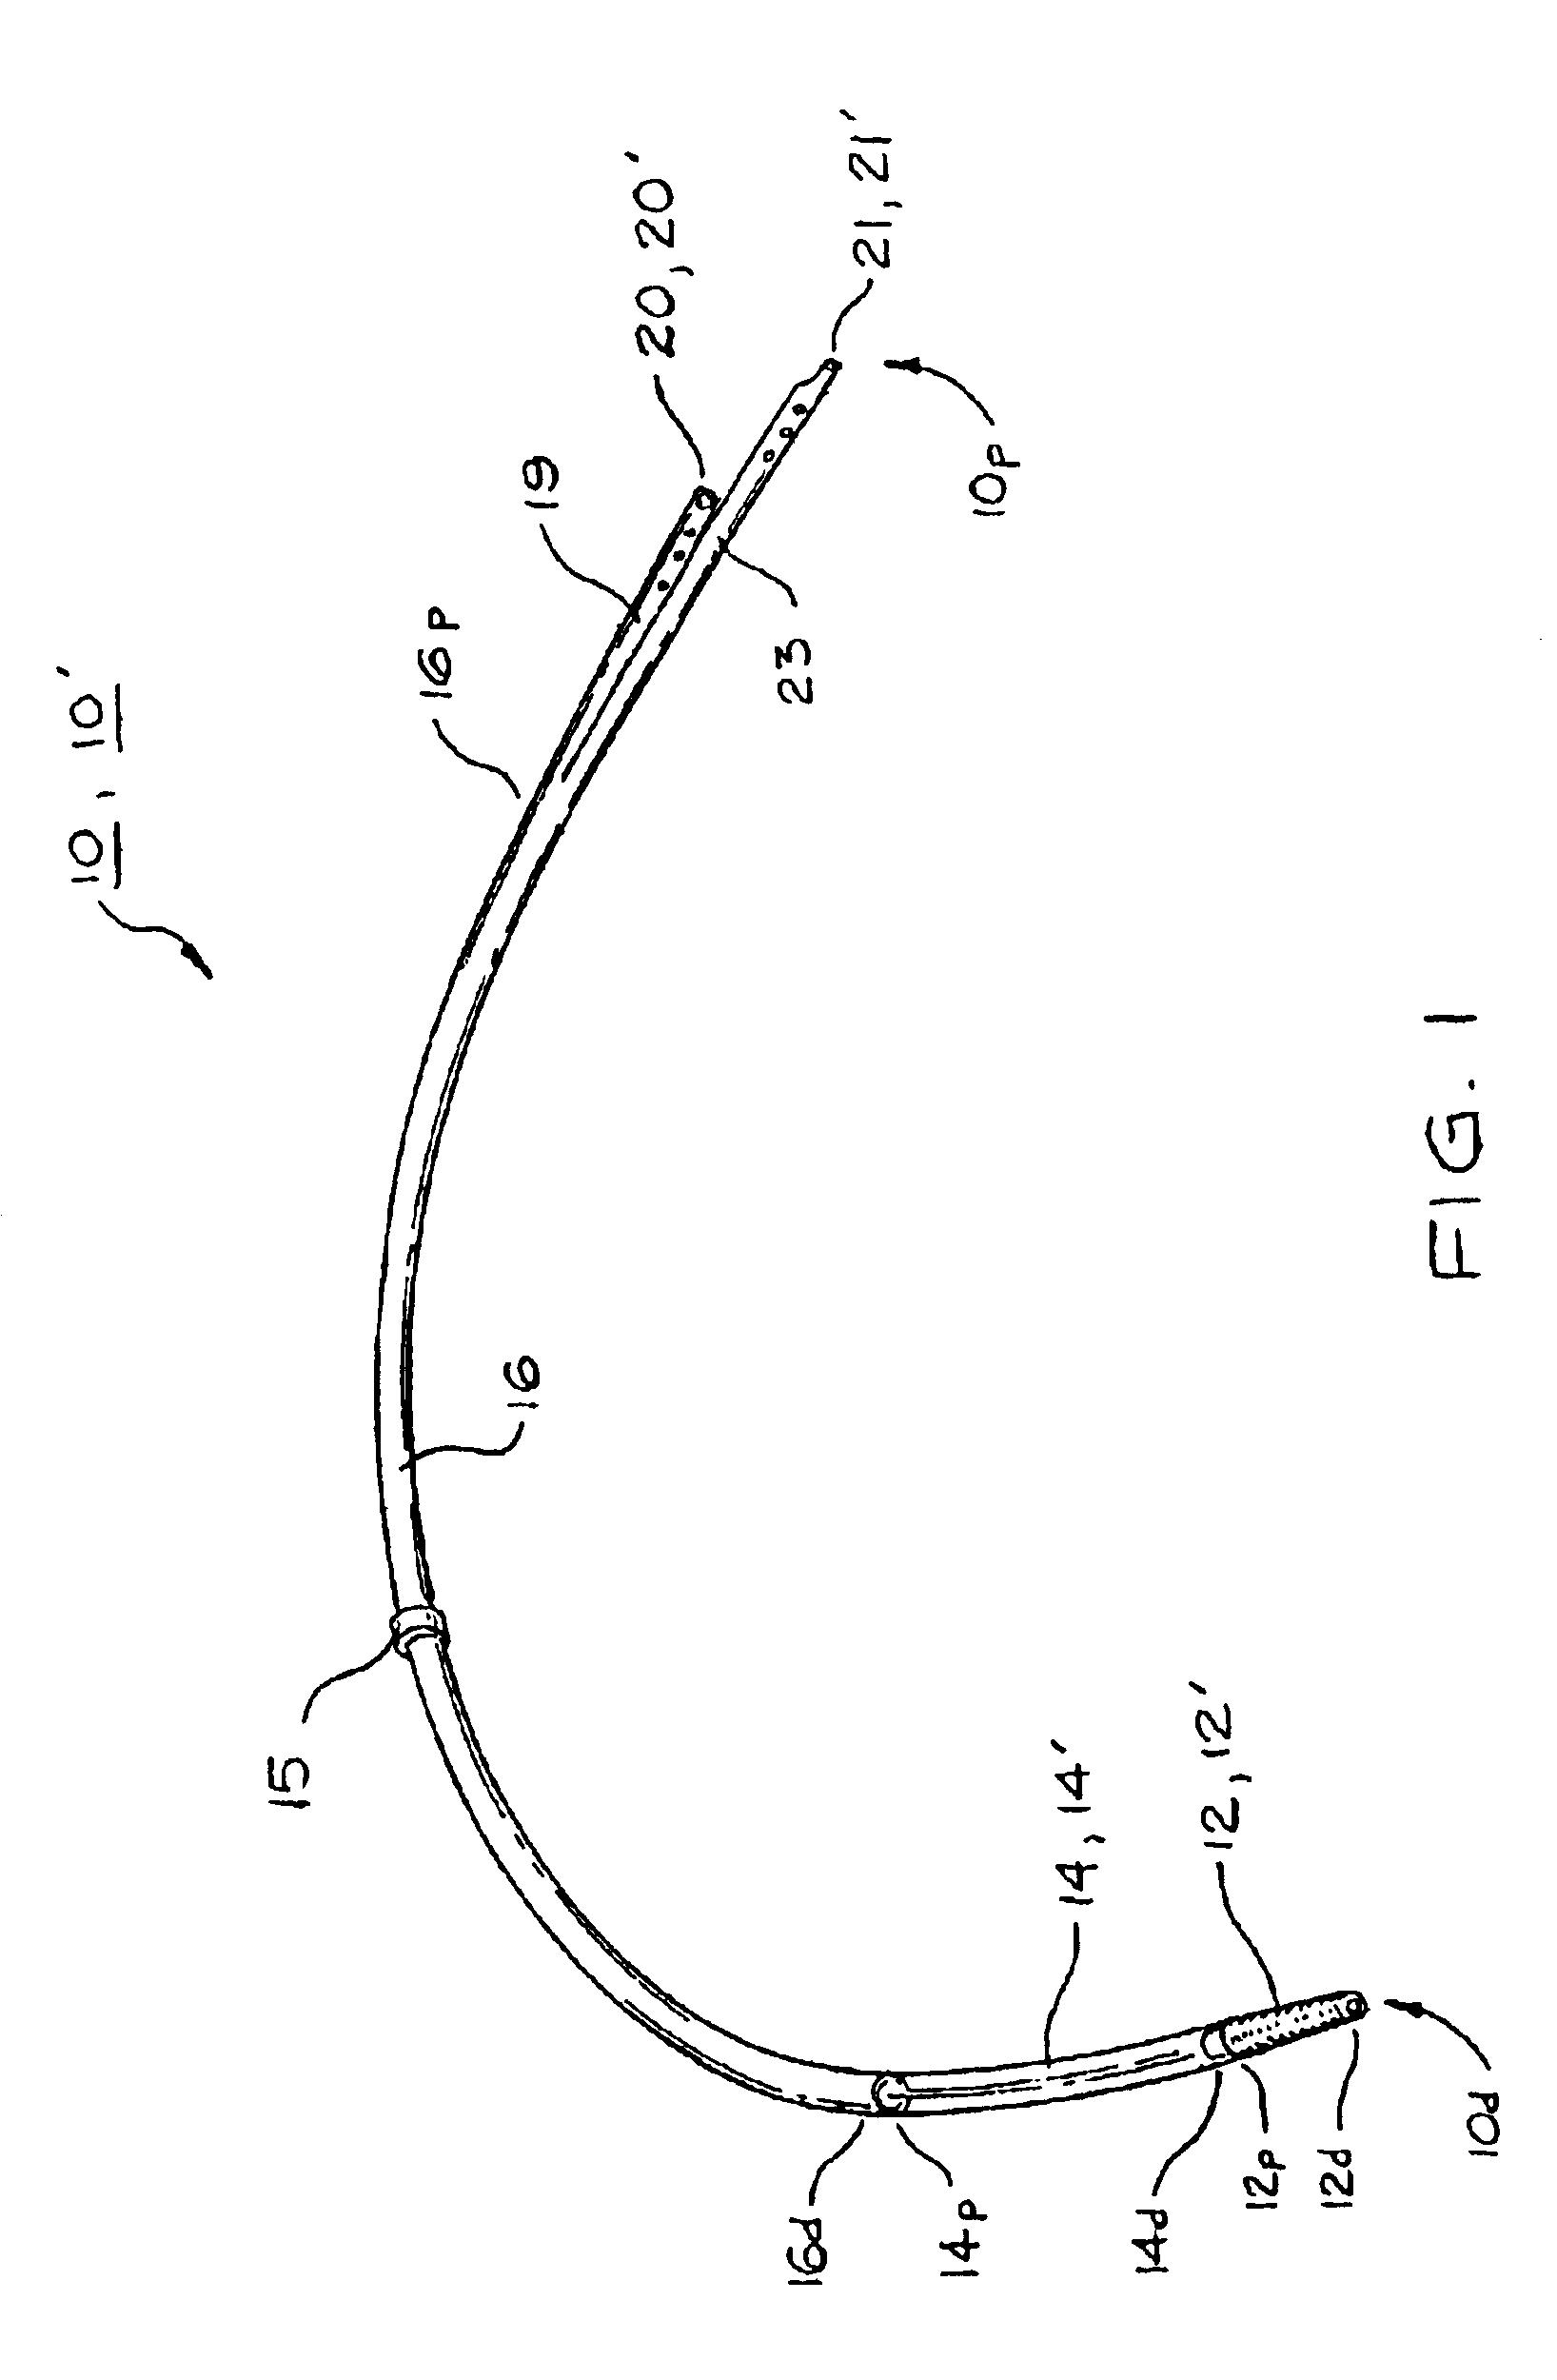 Multi-lumen catheter with integrated connector